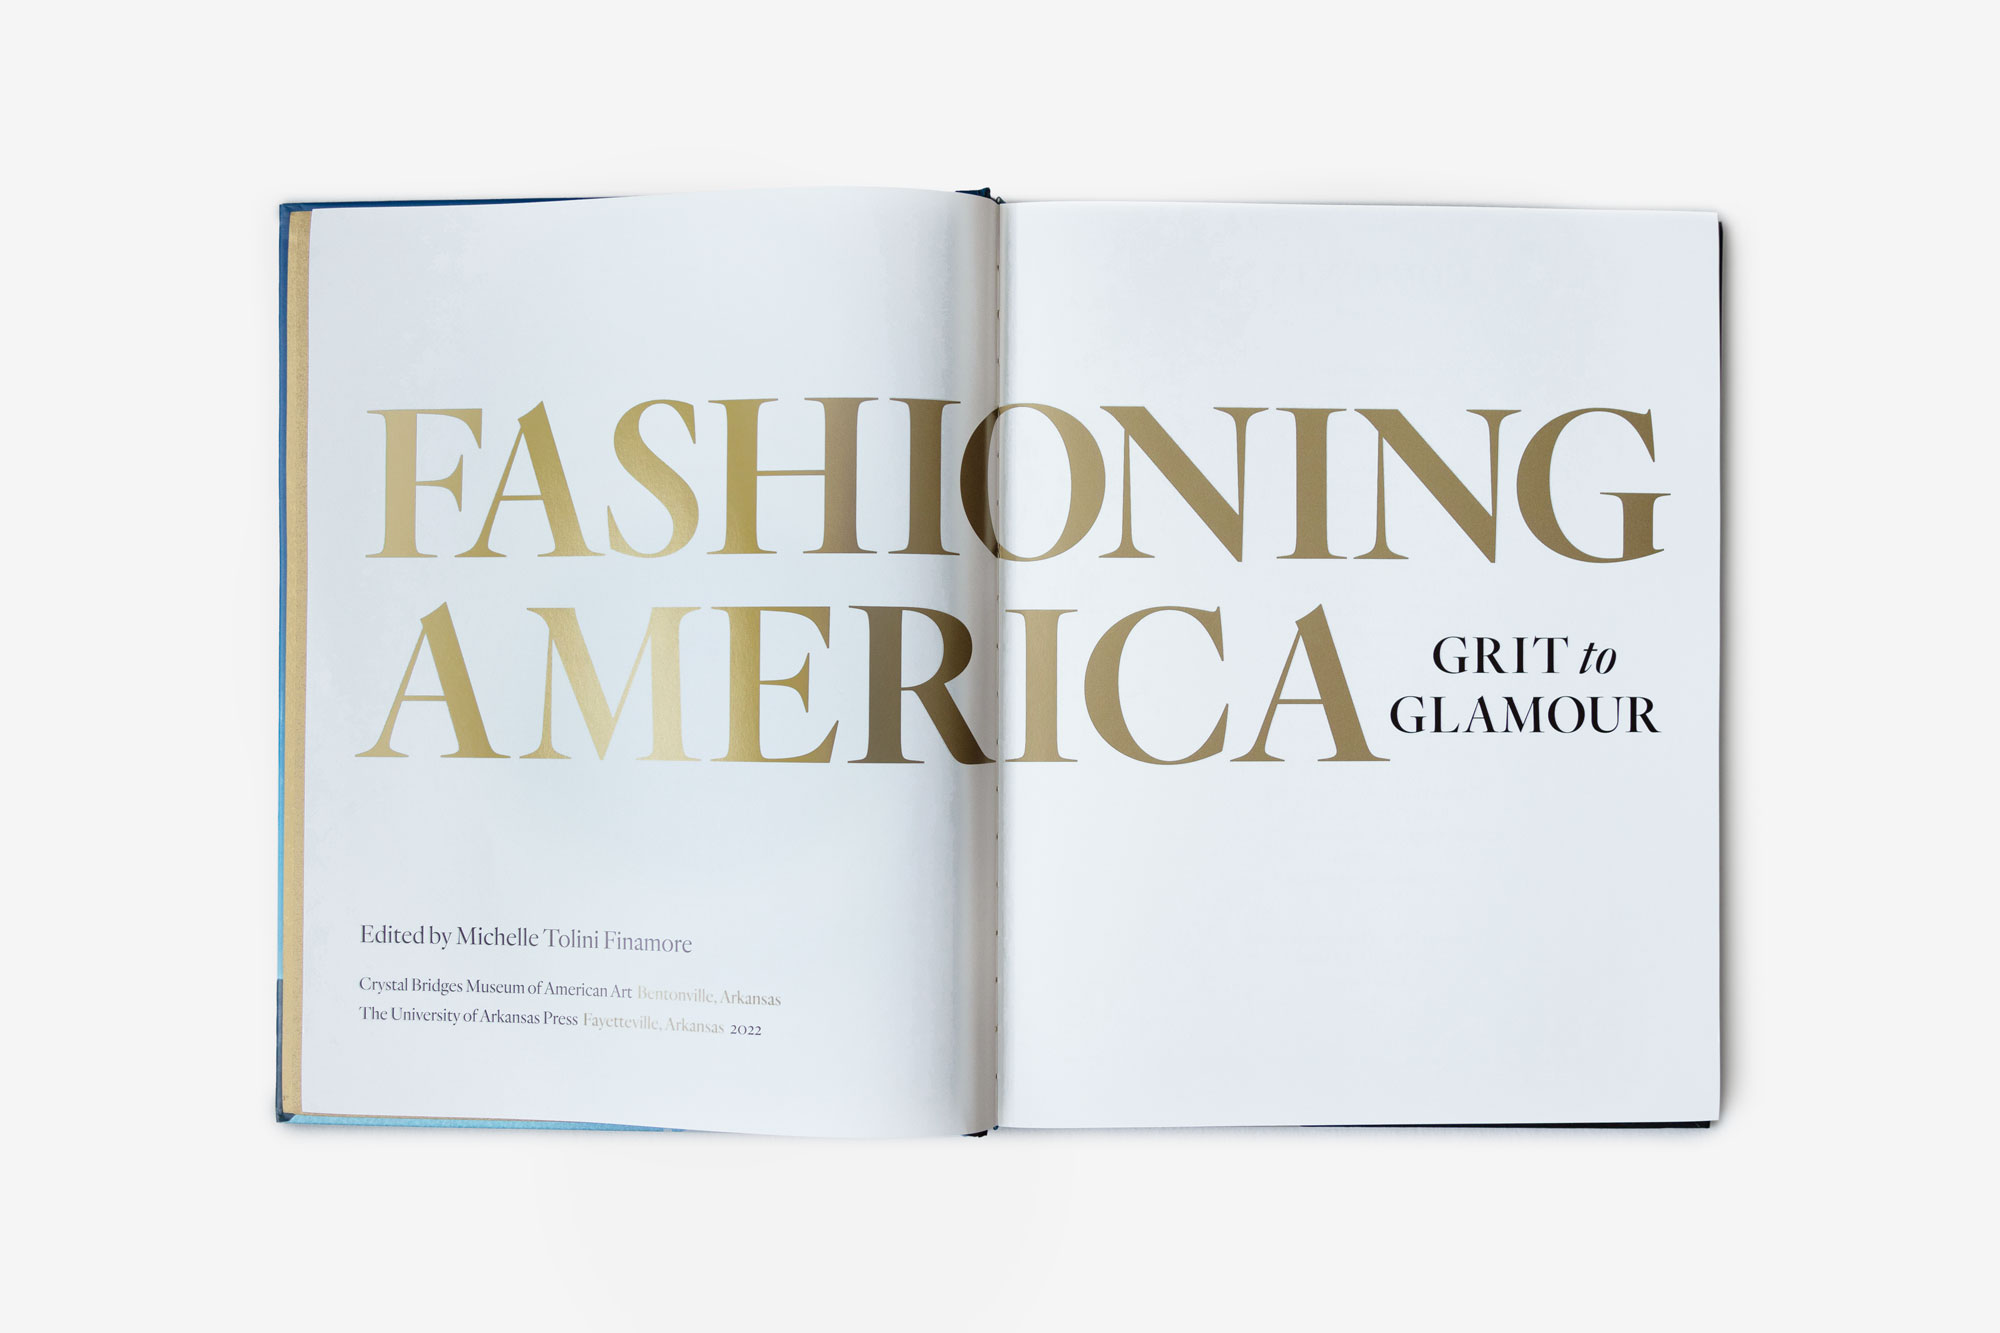 Fashioning America: Grit to Glamour, a book edited by Michelle Tolini Finamore